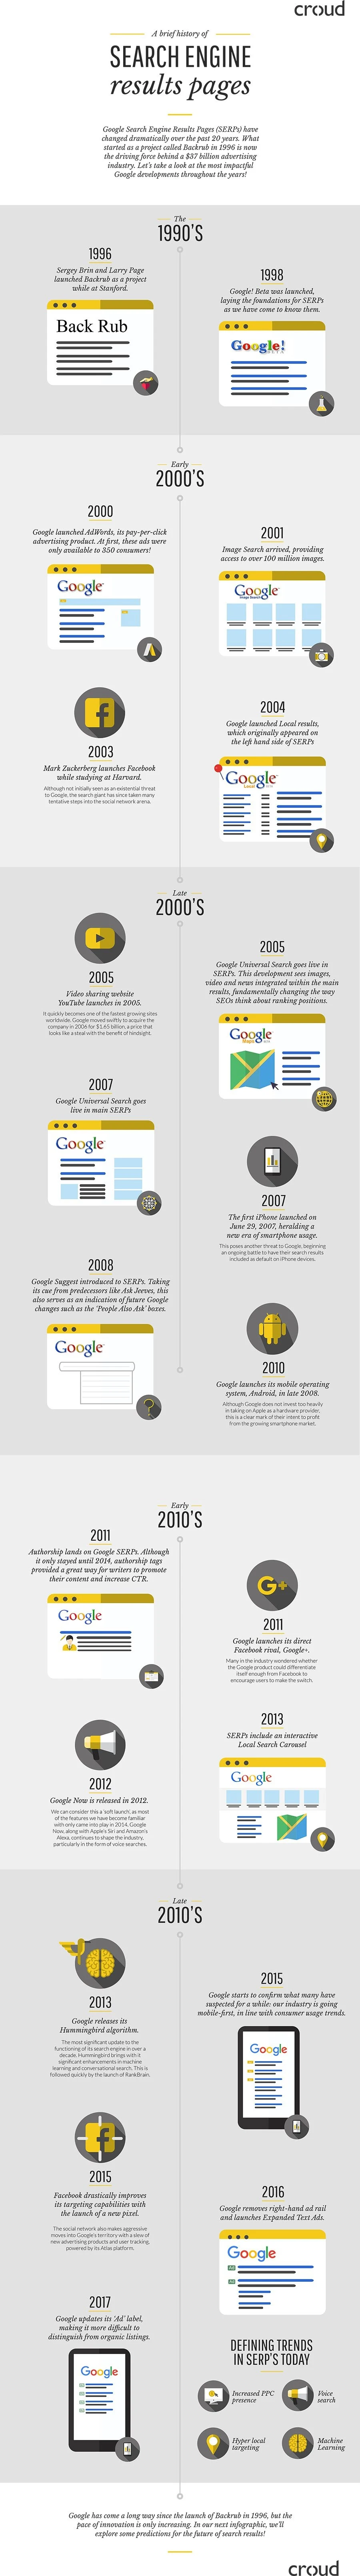 A Brief History of Search Engine Result Pages - #infographic